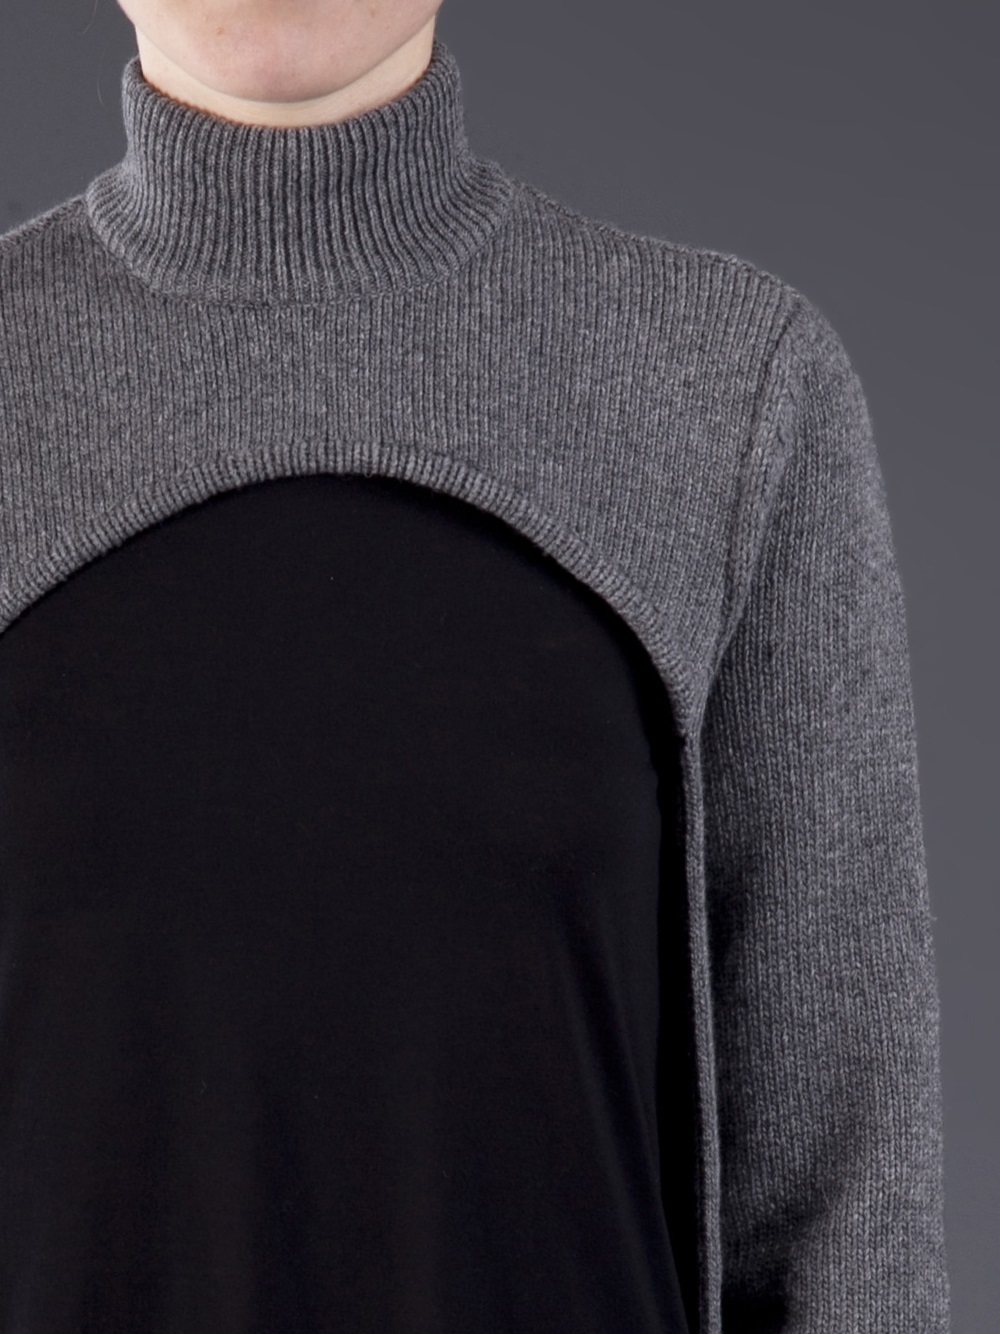 Givenchy Turtleneck Sweater in Grey (Gray) - Lyst